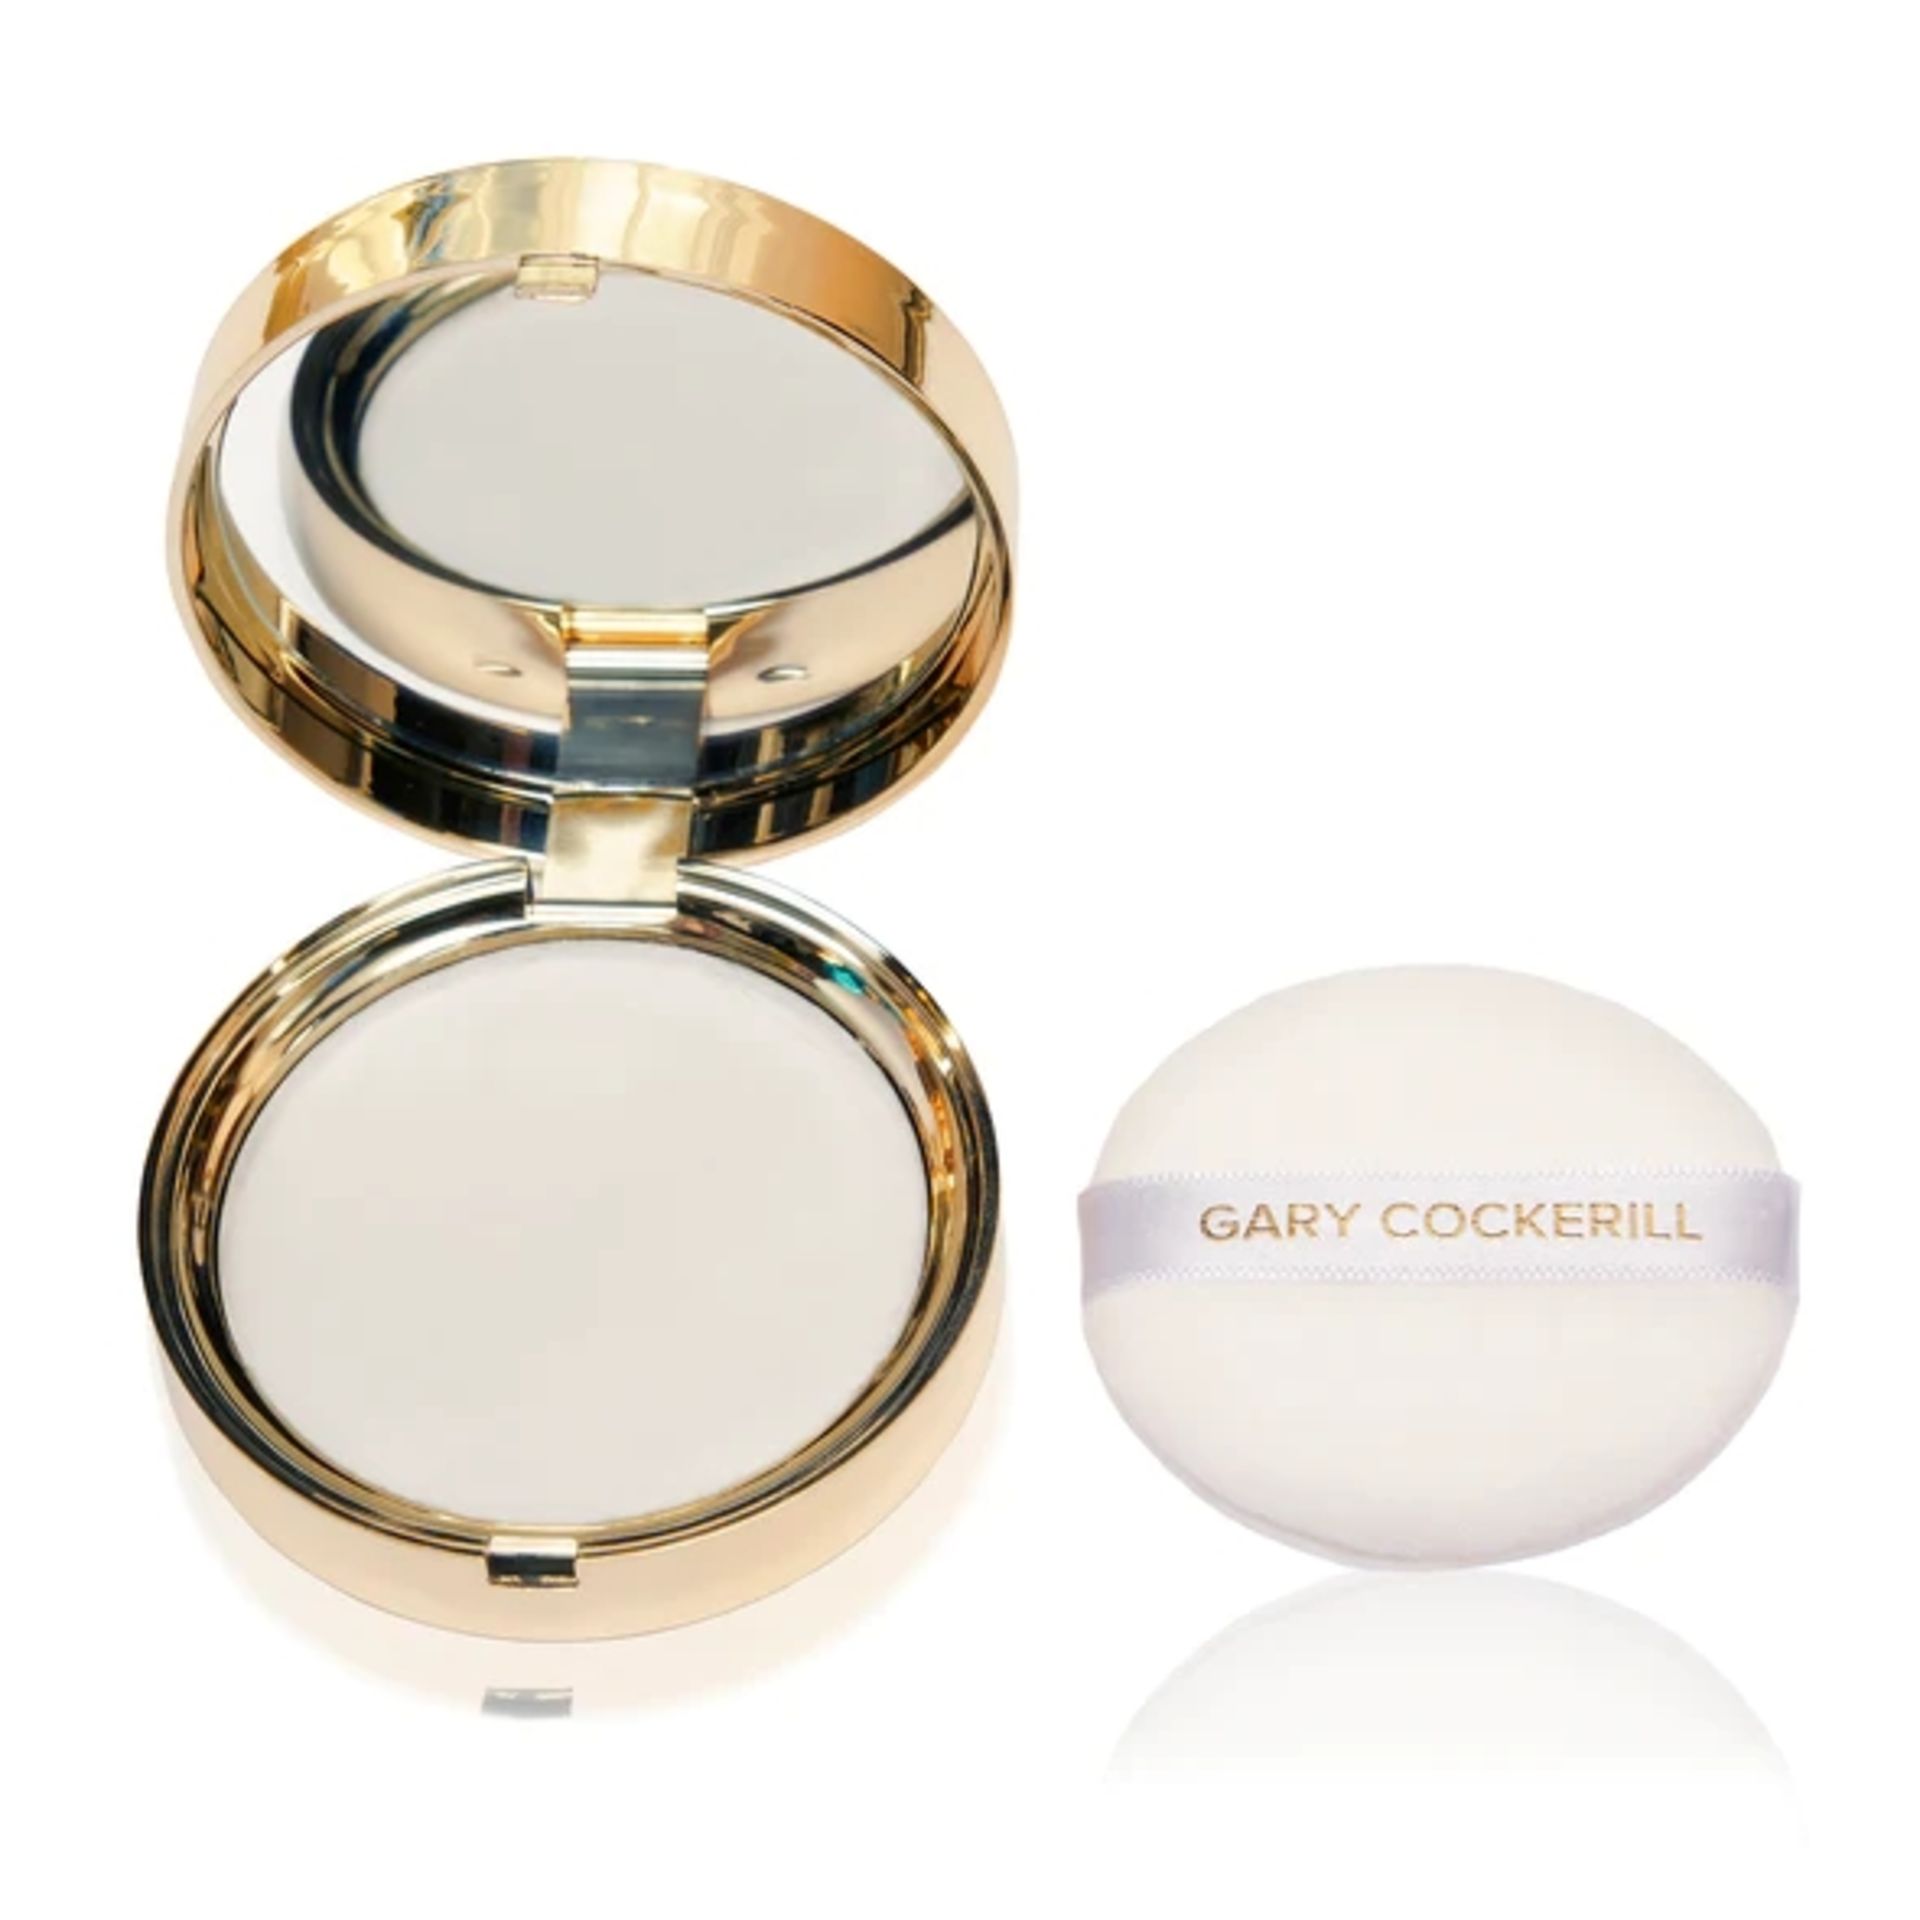 17 X BRAND NEW GARY COCKERILL THE ILLUSION FACE POWDER RRP £39 EACH S1P - Image 2 of 3